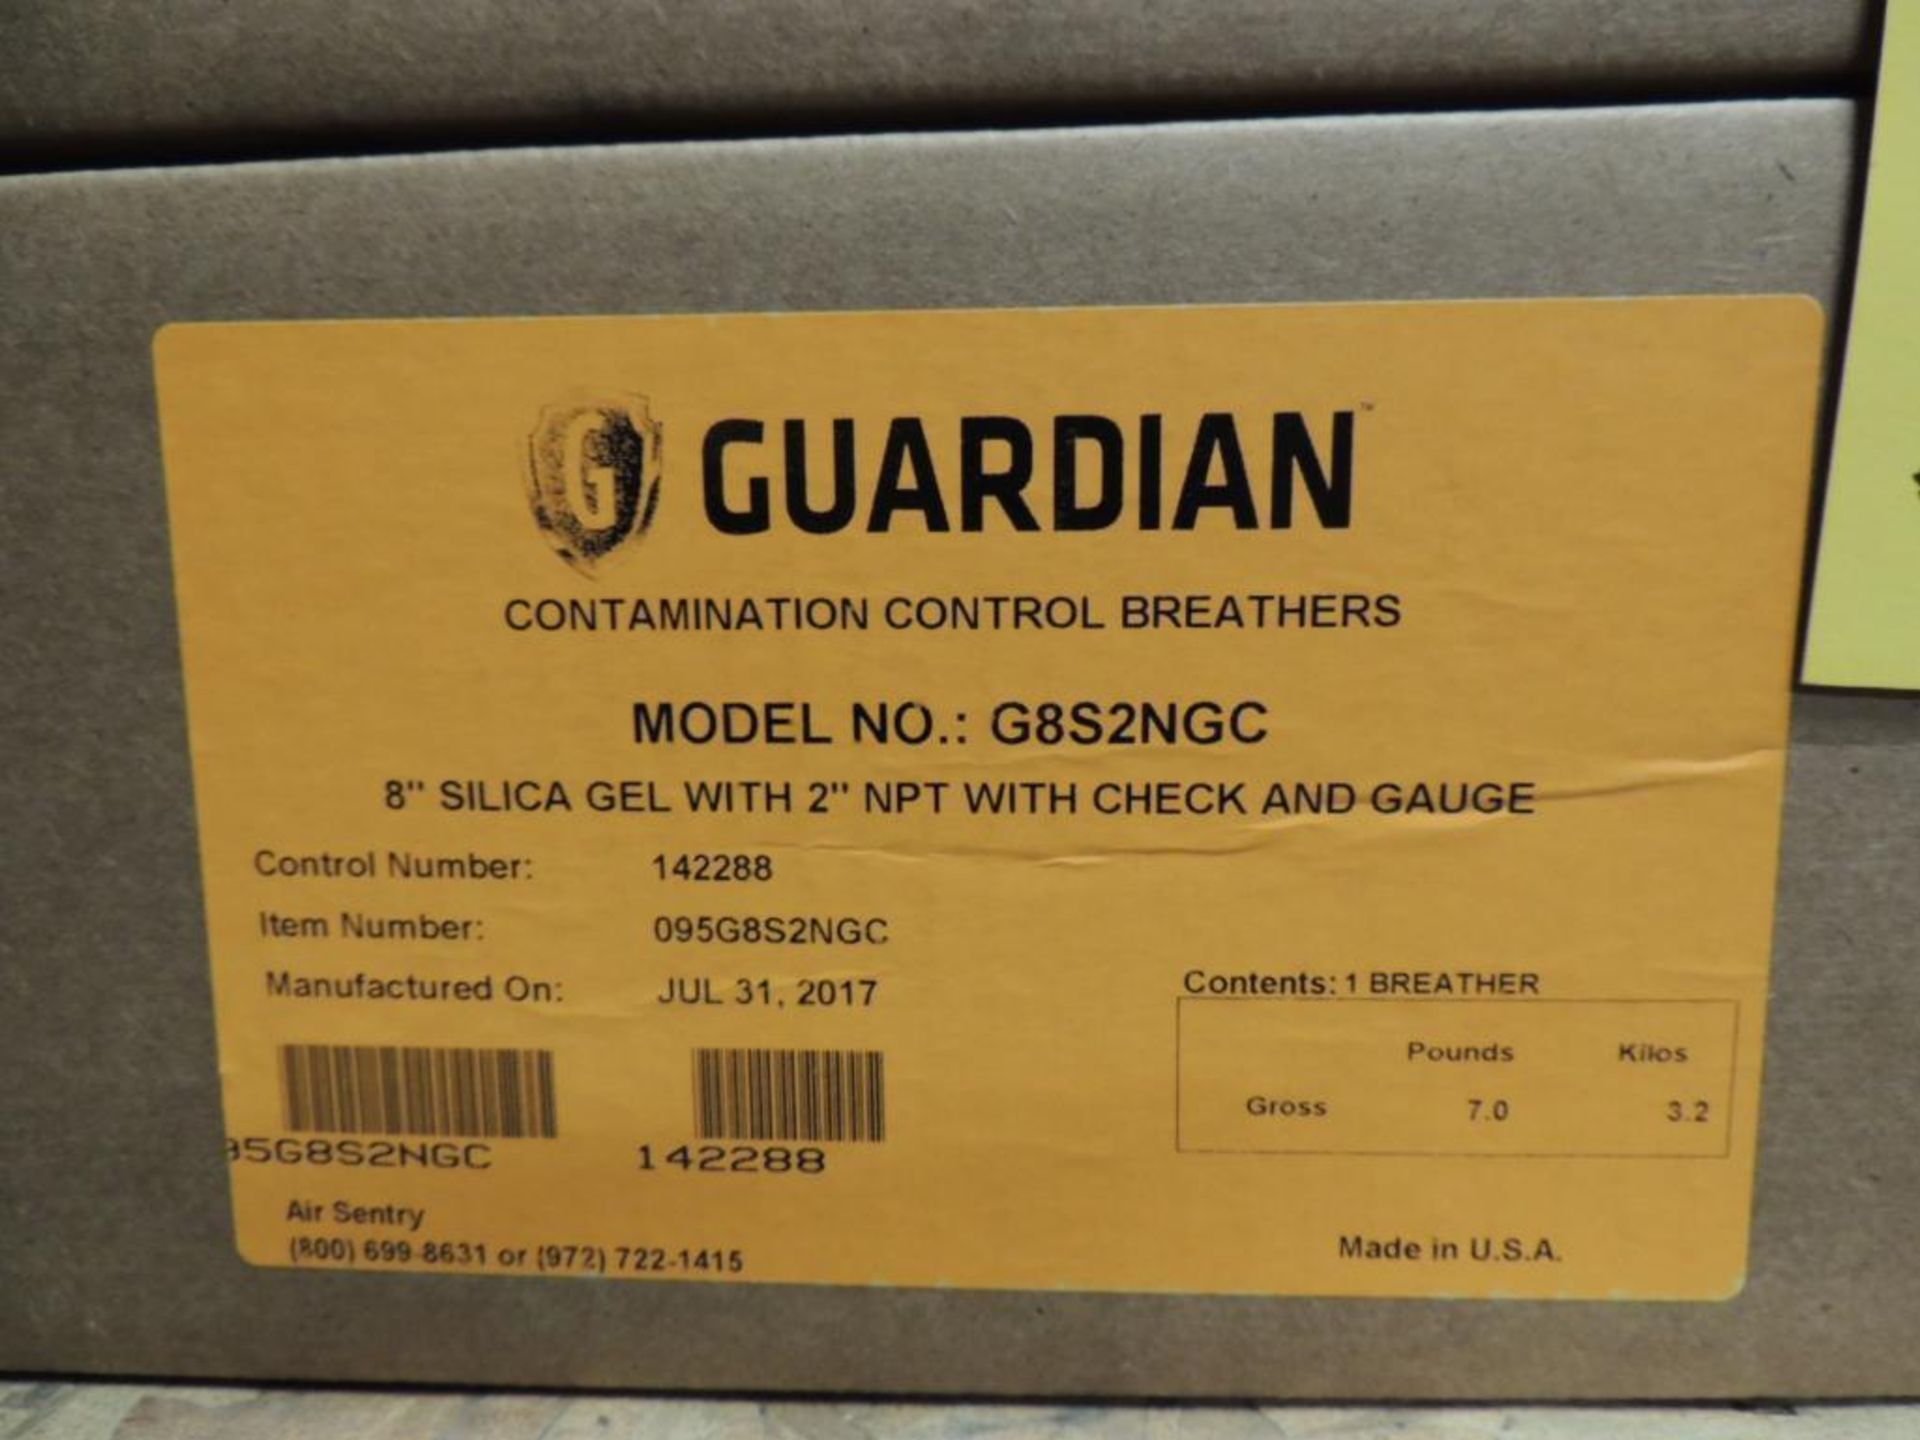 LOT: (12) Guardian 8 in. Contamination Control Breather Model 68SZNC, Silica Gel with 2 in. NPT